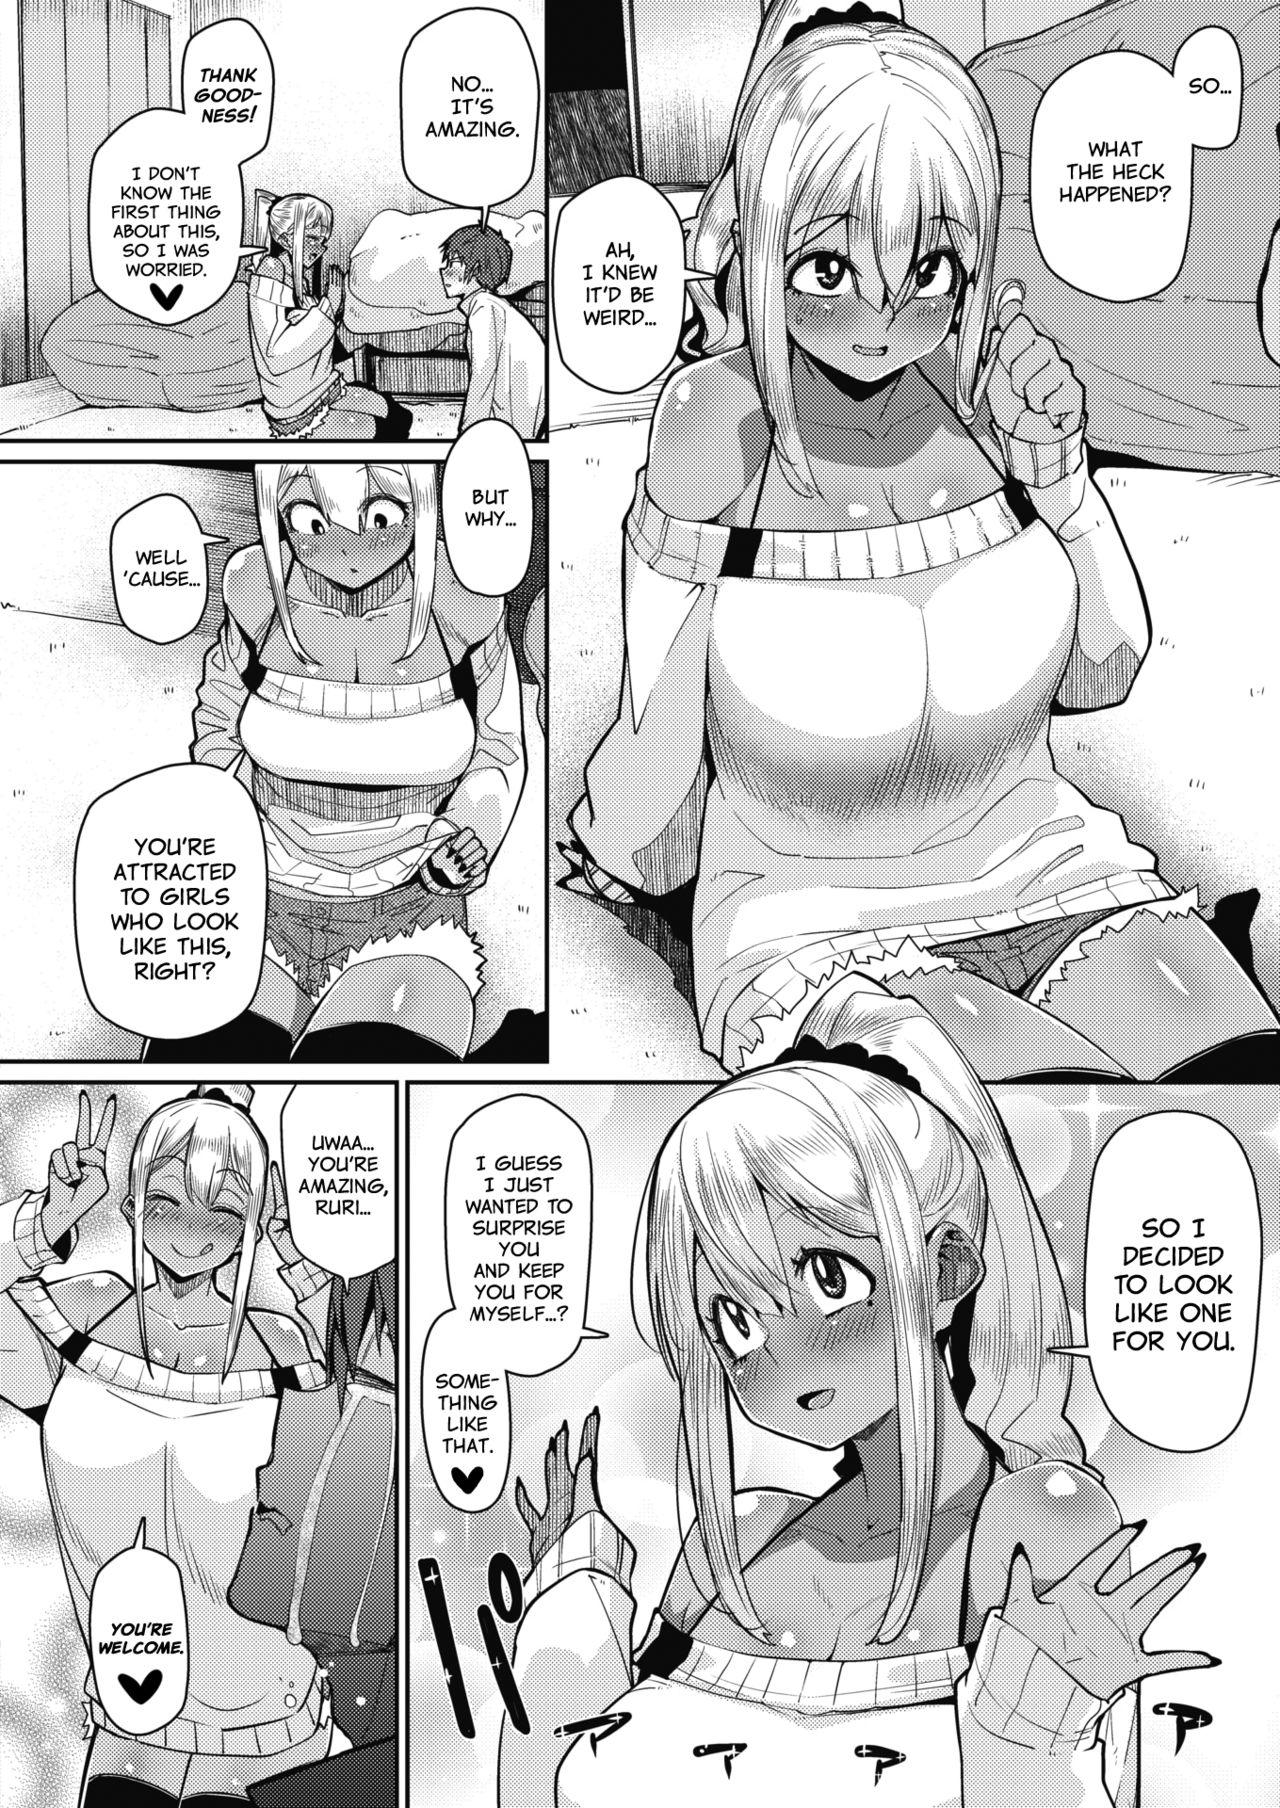 Femboy Gekkan "The Bitch" o Mita Onna no Hannou ni Tsuite | About the Reaction of the Girl Who Saw "The Bitch Monthly" Bed - Page 4